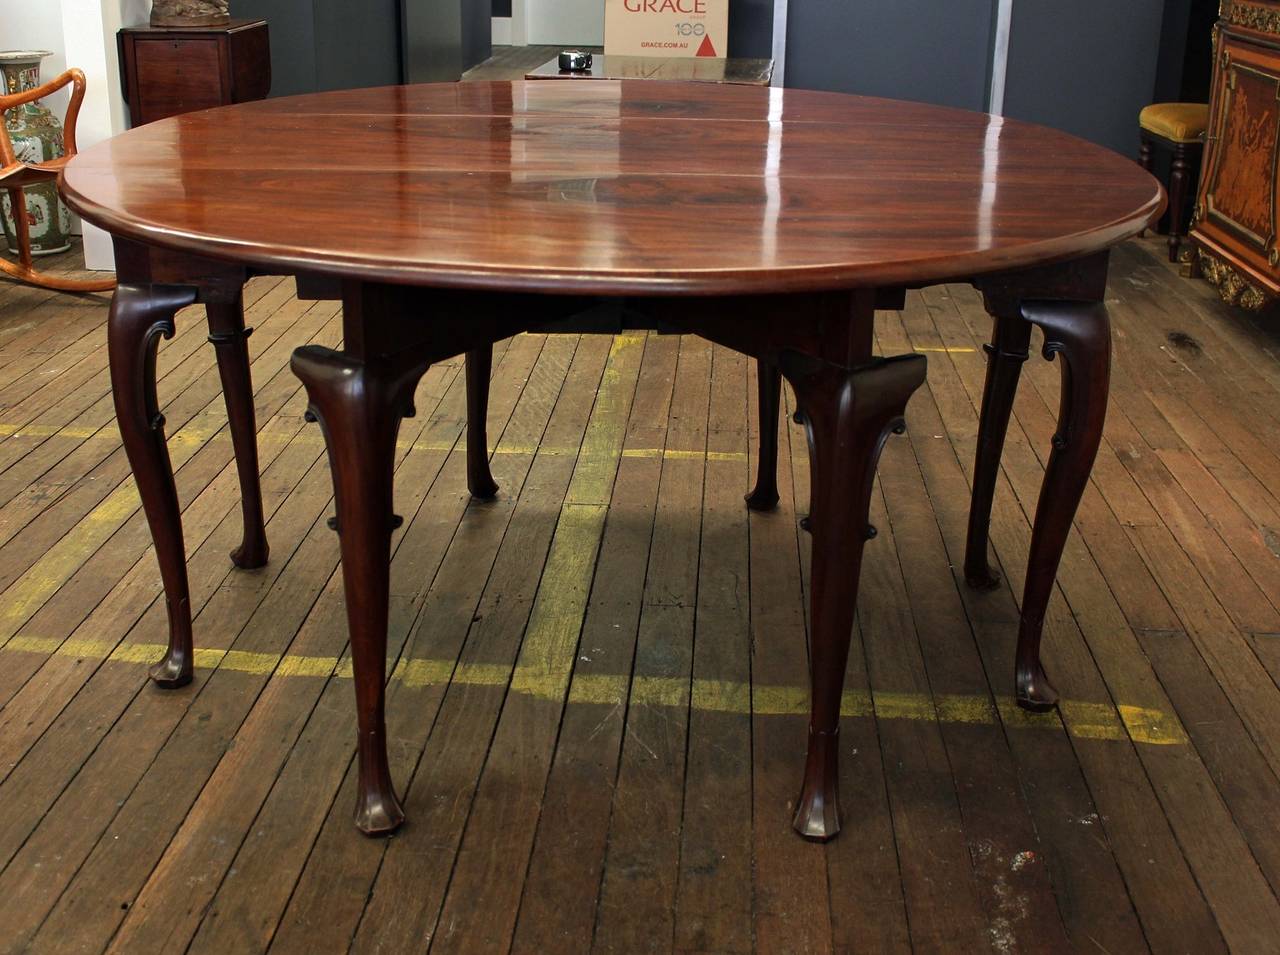 An unusual George II period mahogany gate leg table.
Raised on eight cabriole legs with carved sea scrolls on spreading carved scallop feet. The table opens to form as oval with moulded edge.
Mahogany, oak and chestnut.

Provenance:
Mallet